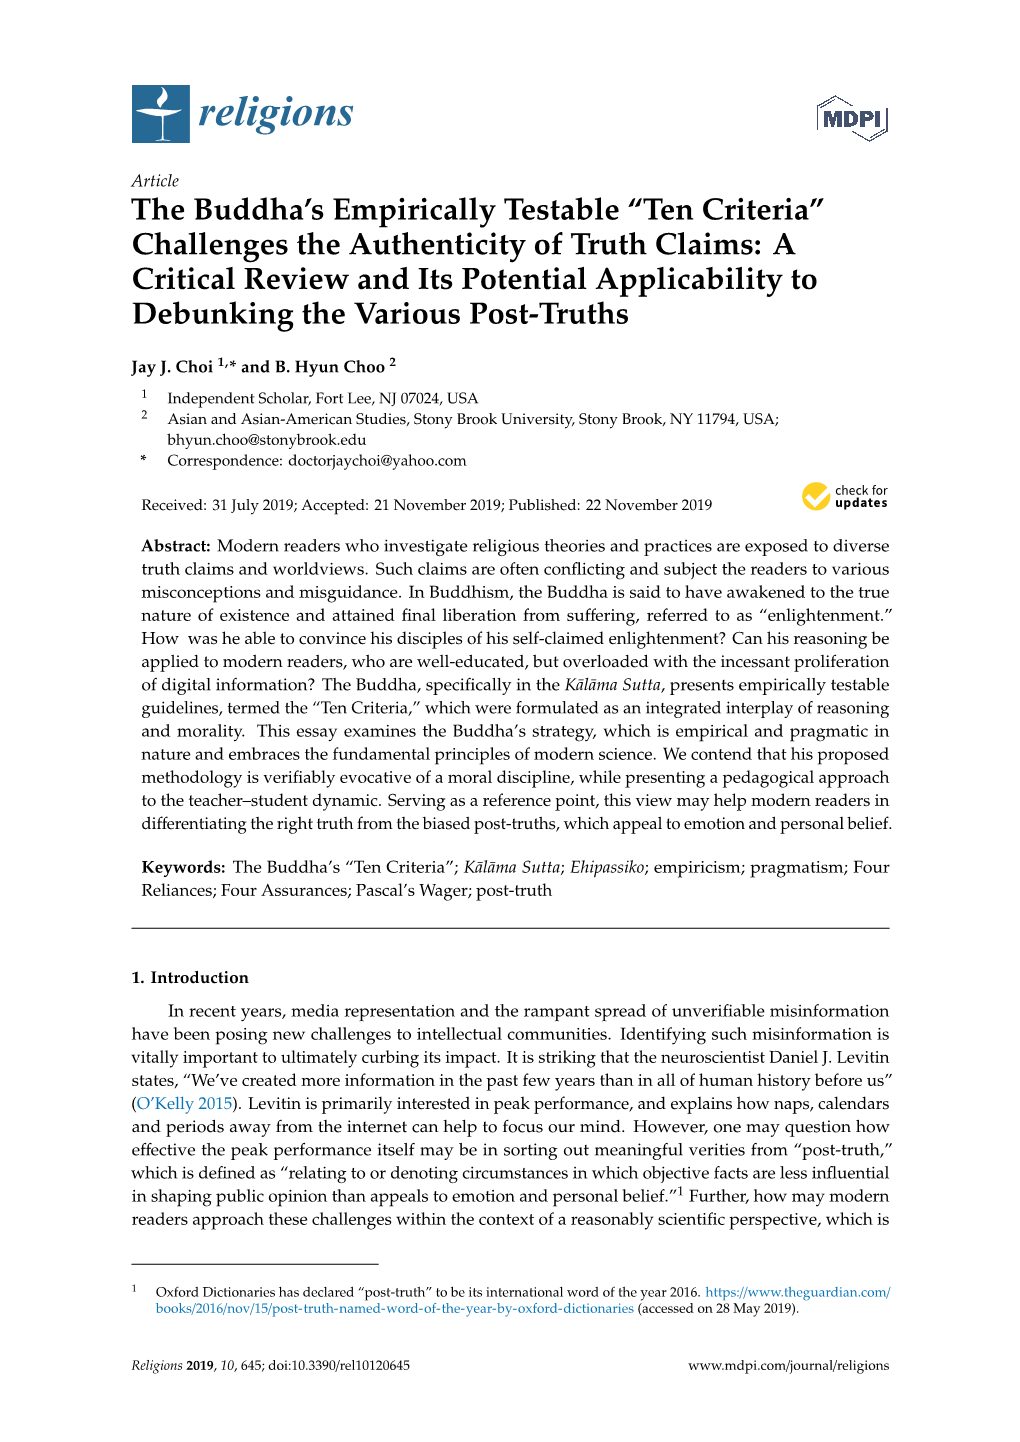 The Buddha's Empirically Testable “Ten Criteria” Challenges the Authenticity of Truth Claims: a Critical Review and Its Potential Applicability to Debunking the Various Post-Truths